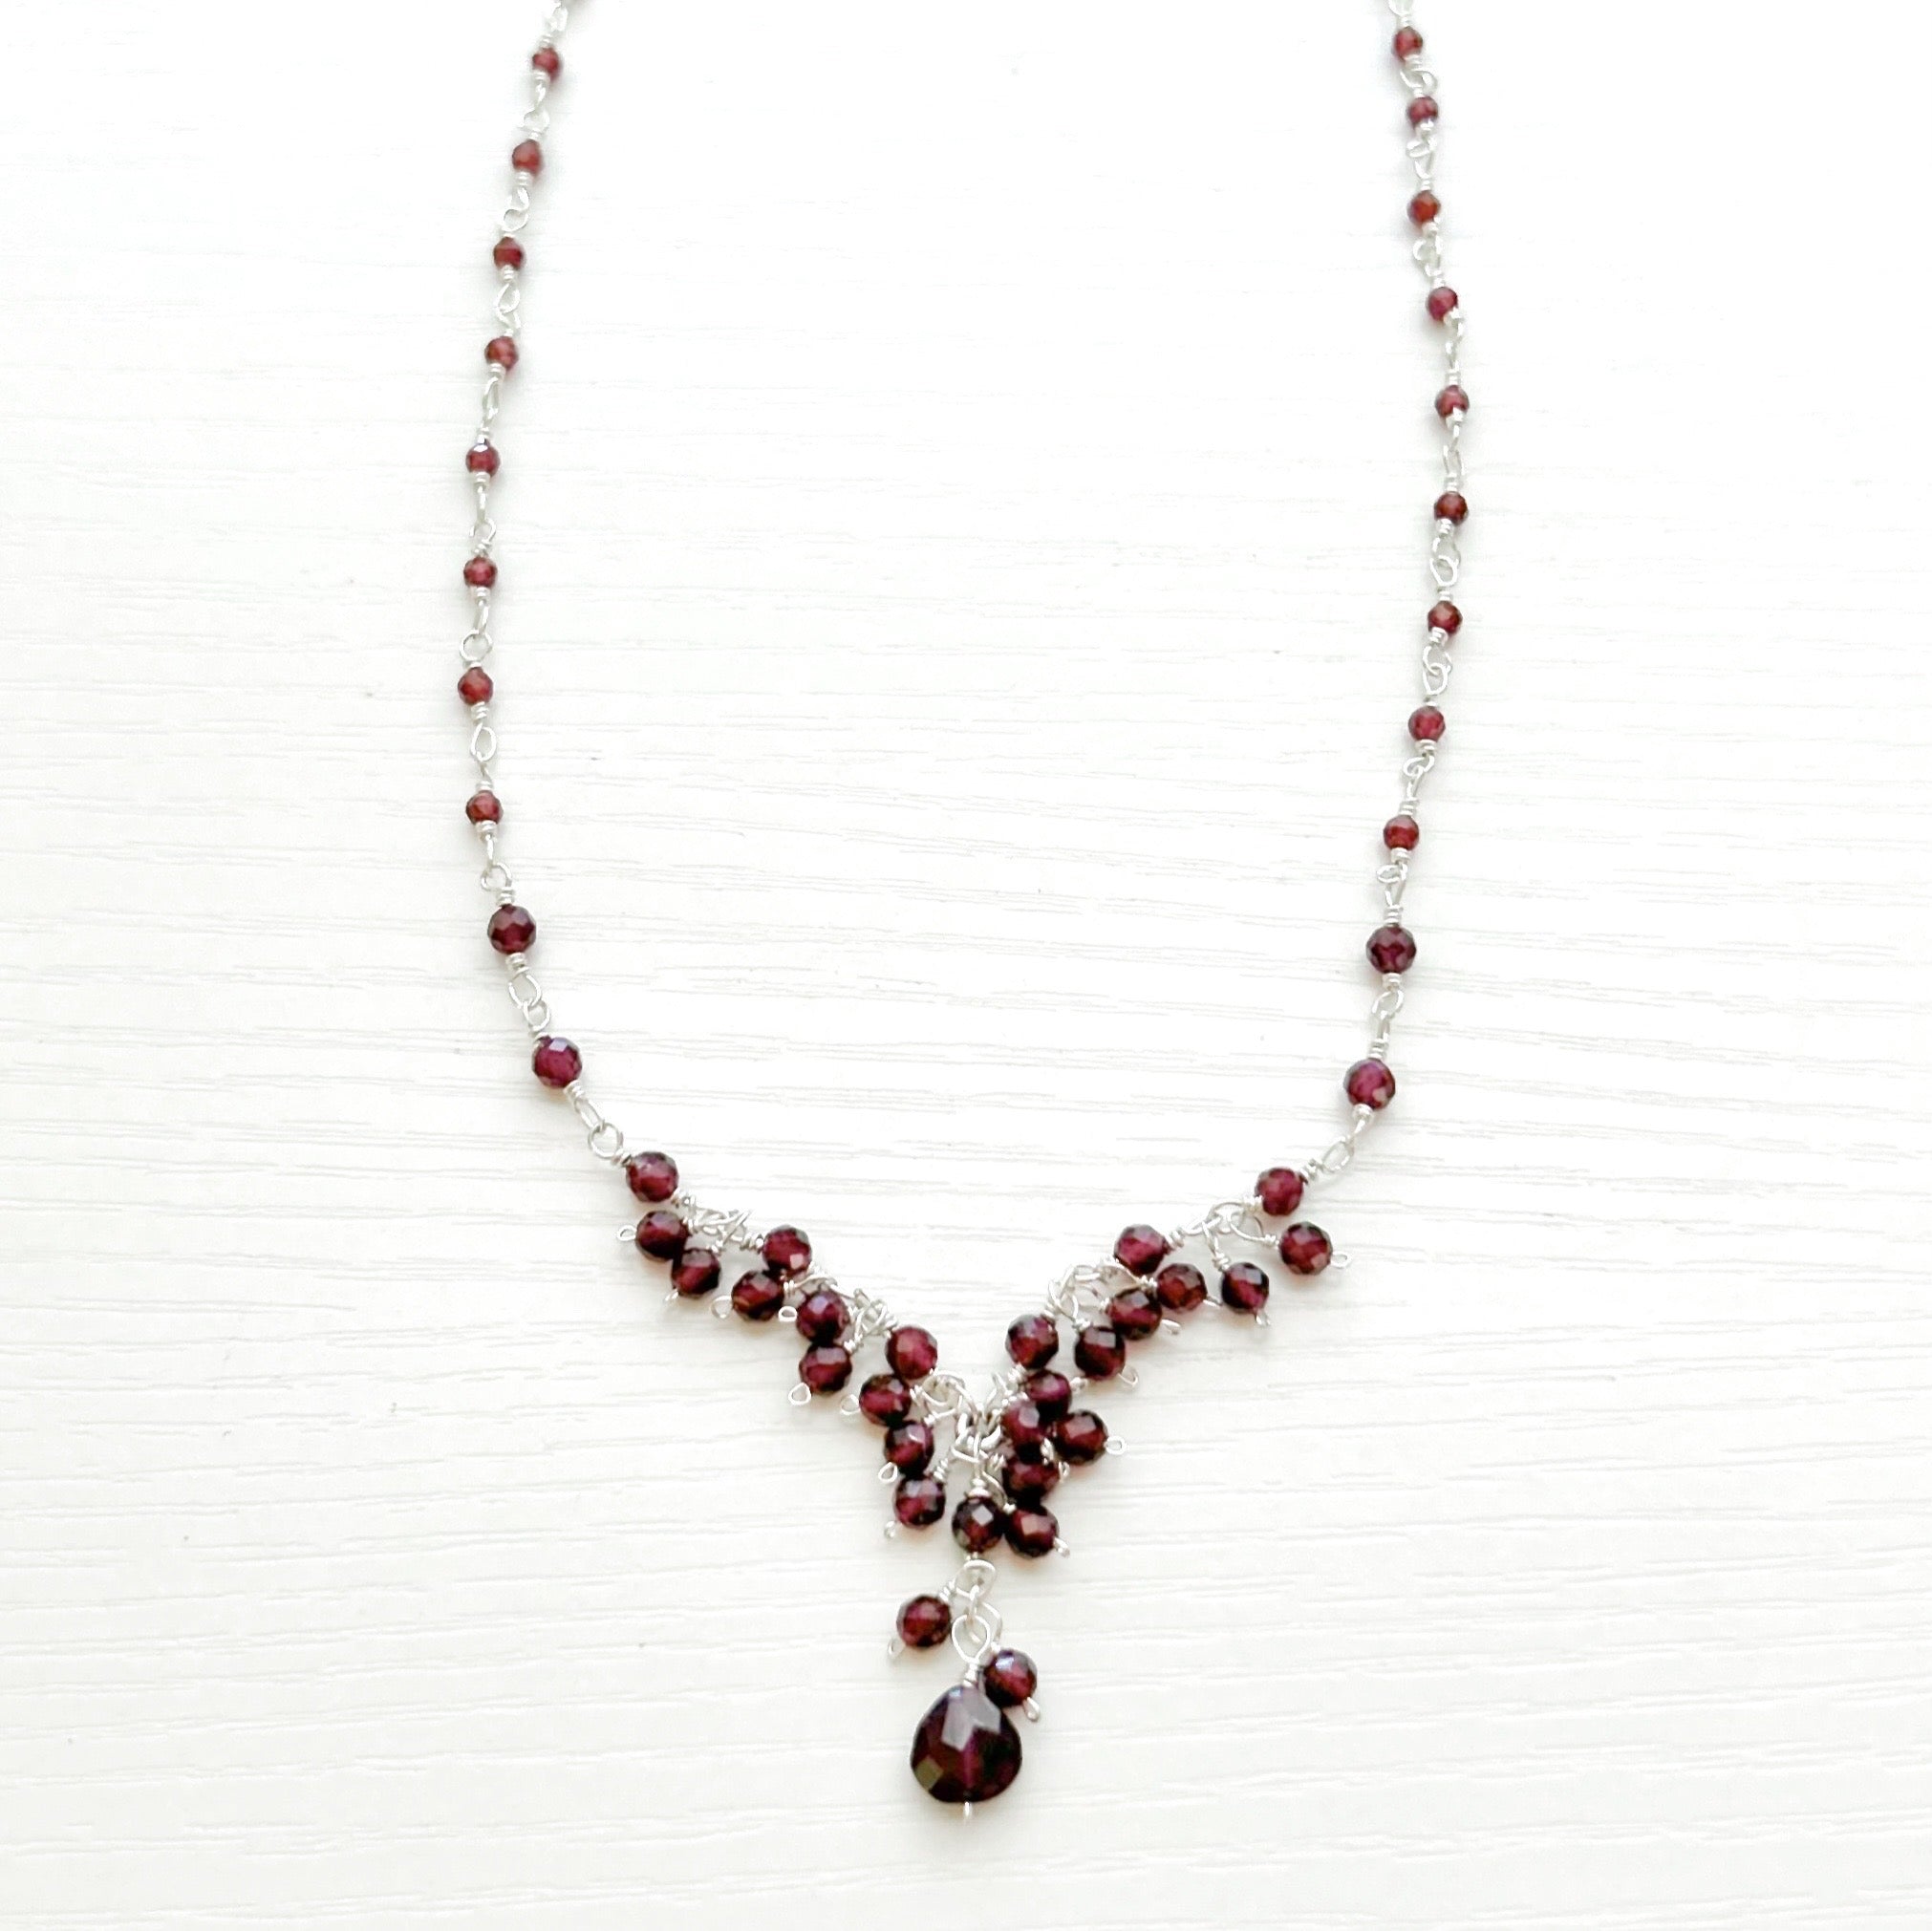 garnet beaded necklace with pendant